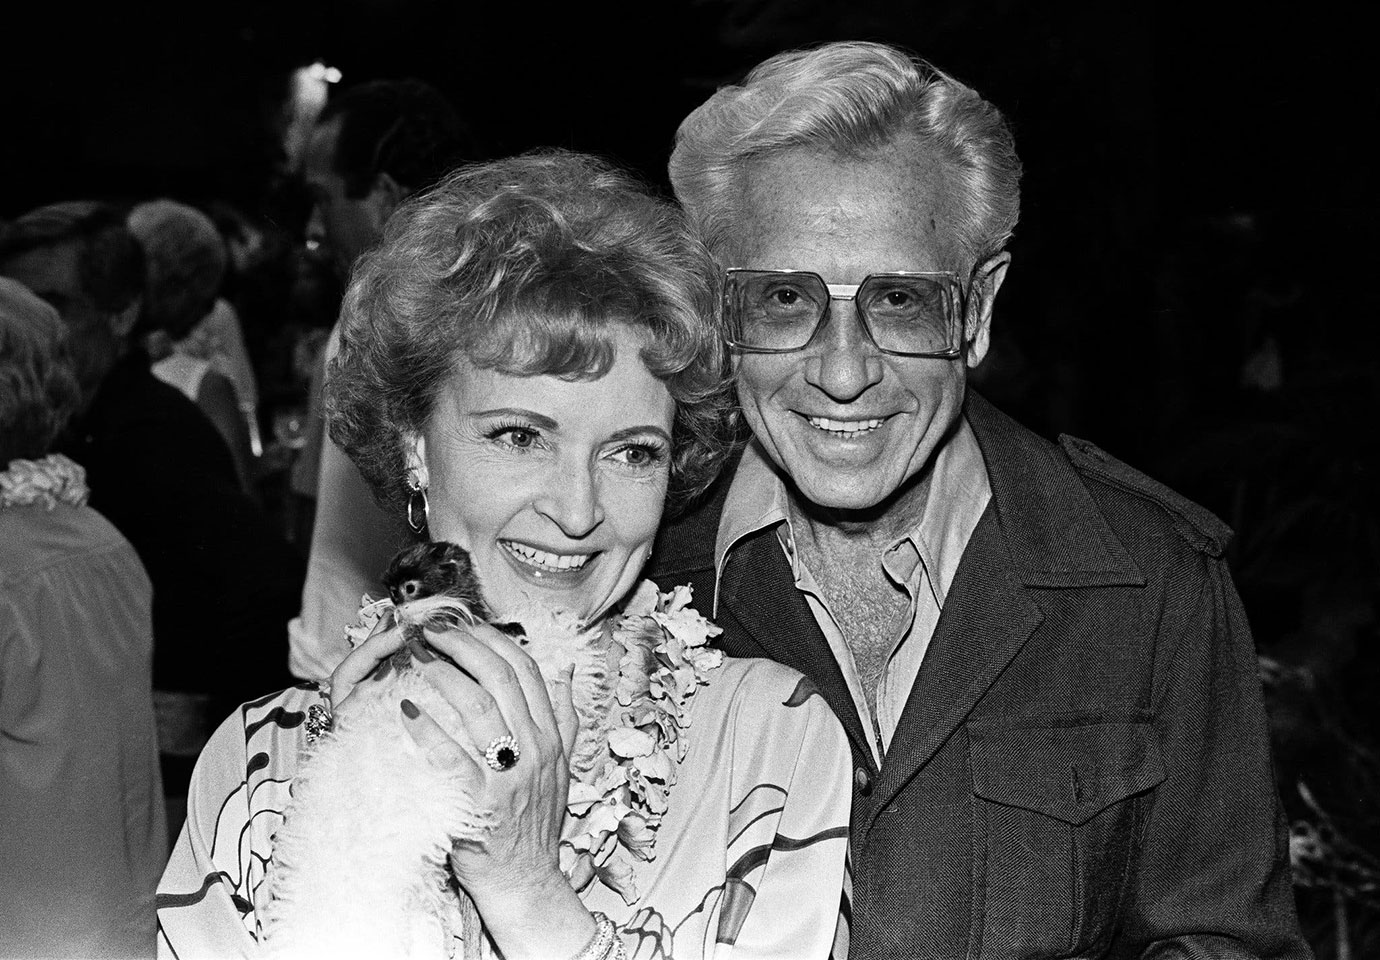 Description: Description: Ms. White and her husband, Allen Ludden, at a fund-raising party for the Los Angeles Zoo in 1979. Ms. White had a longstanding interest in animal welfare.